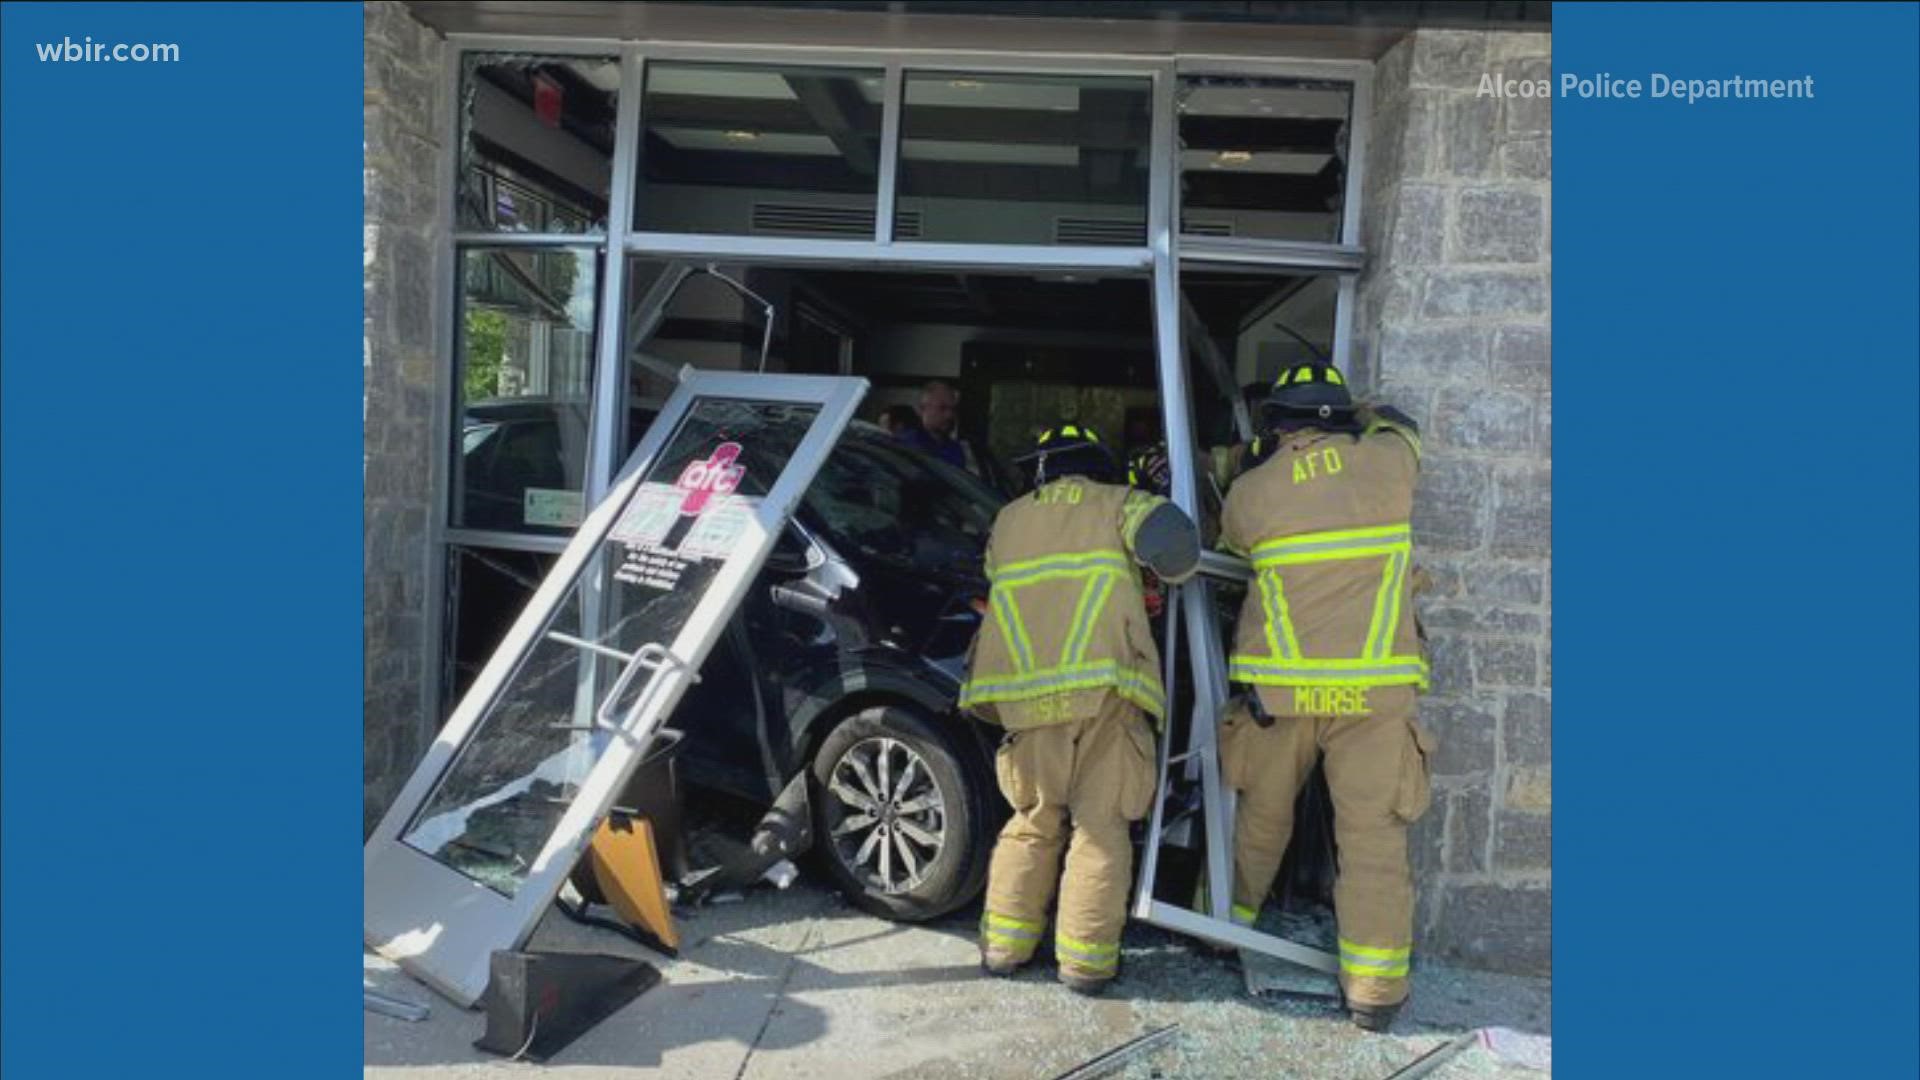 Police said a patient's arm was pinned after the vehicle came crashing into the urgent care center.